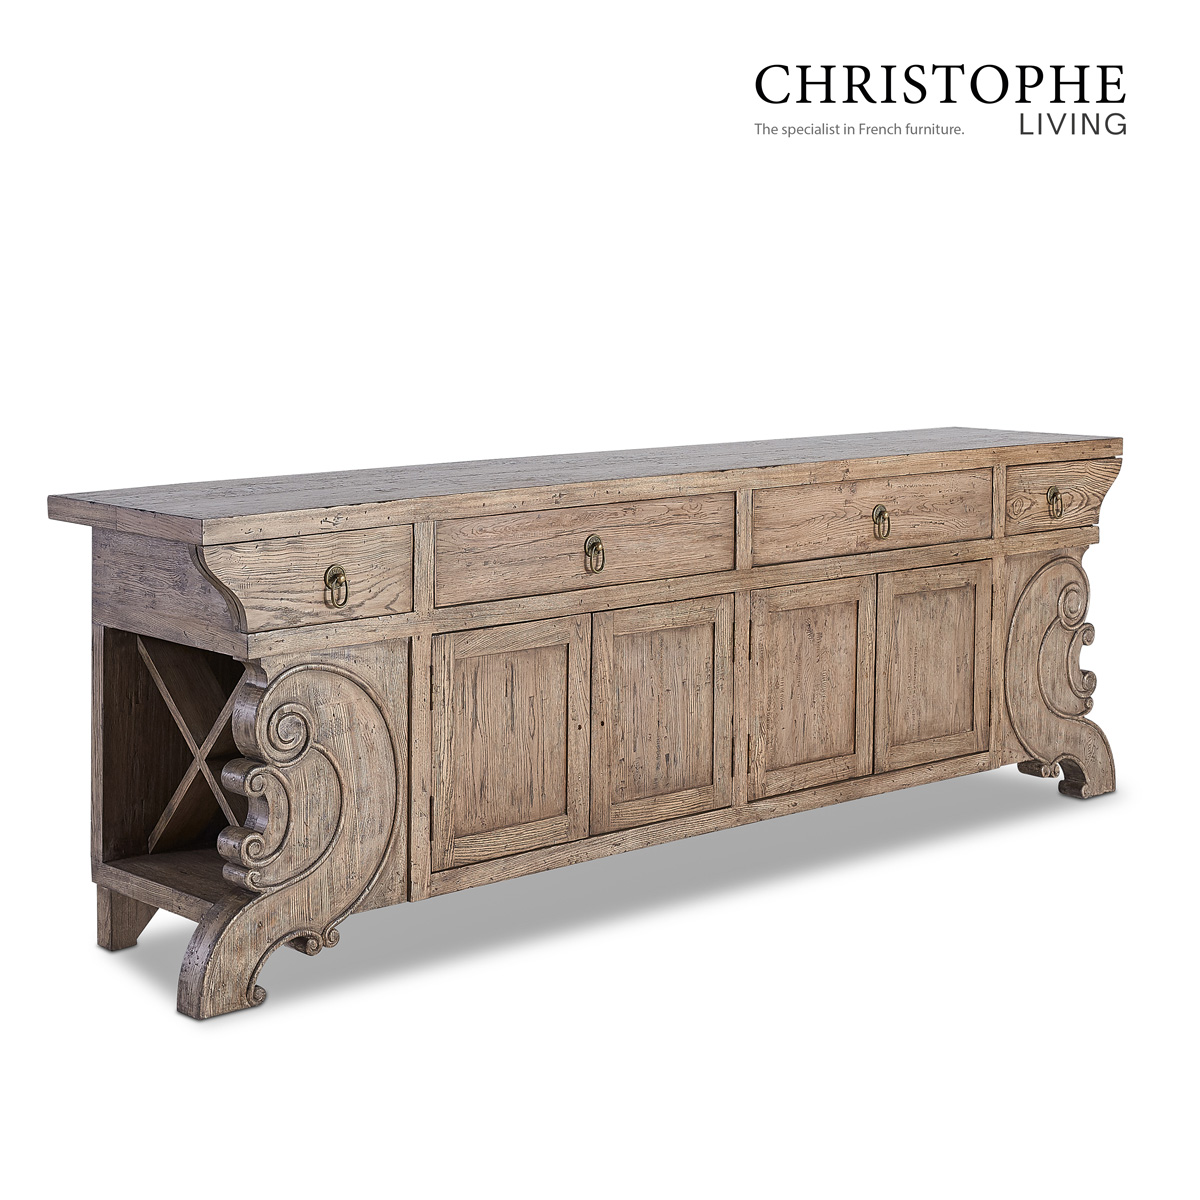 Pacific French Provincial Style Dining & Living Room Sideboard in Natural Oak Timber with Wine Storage and Brass Hardware